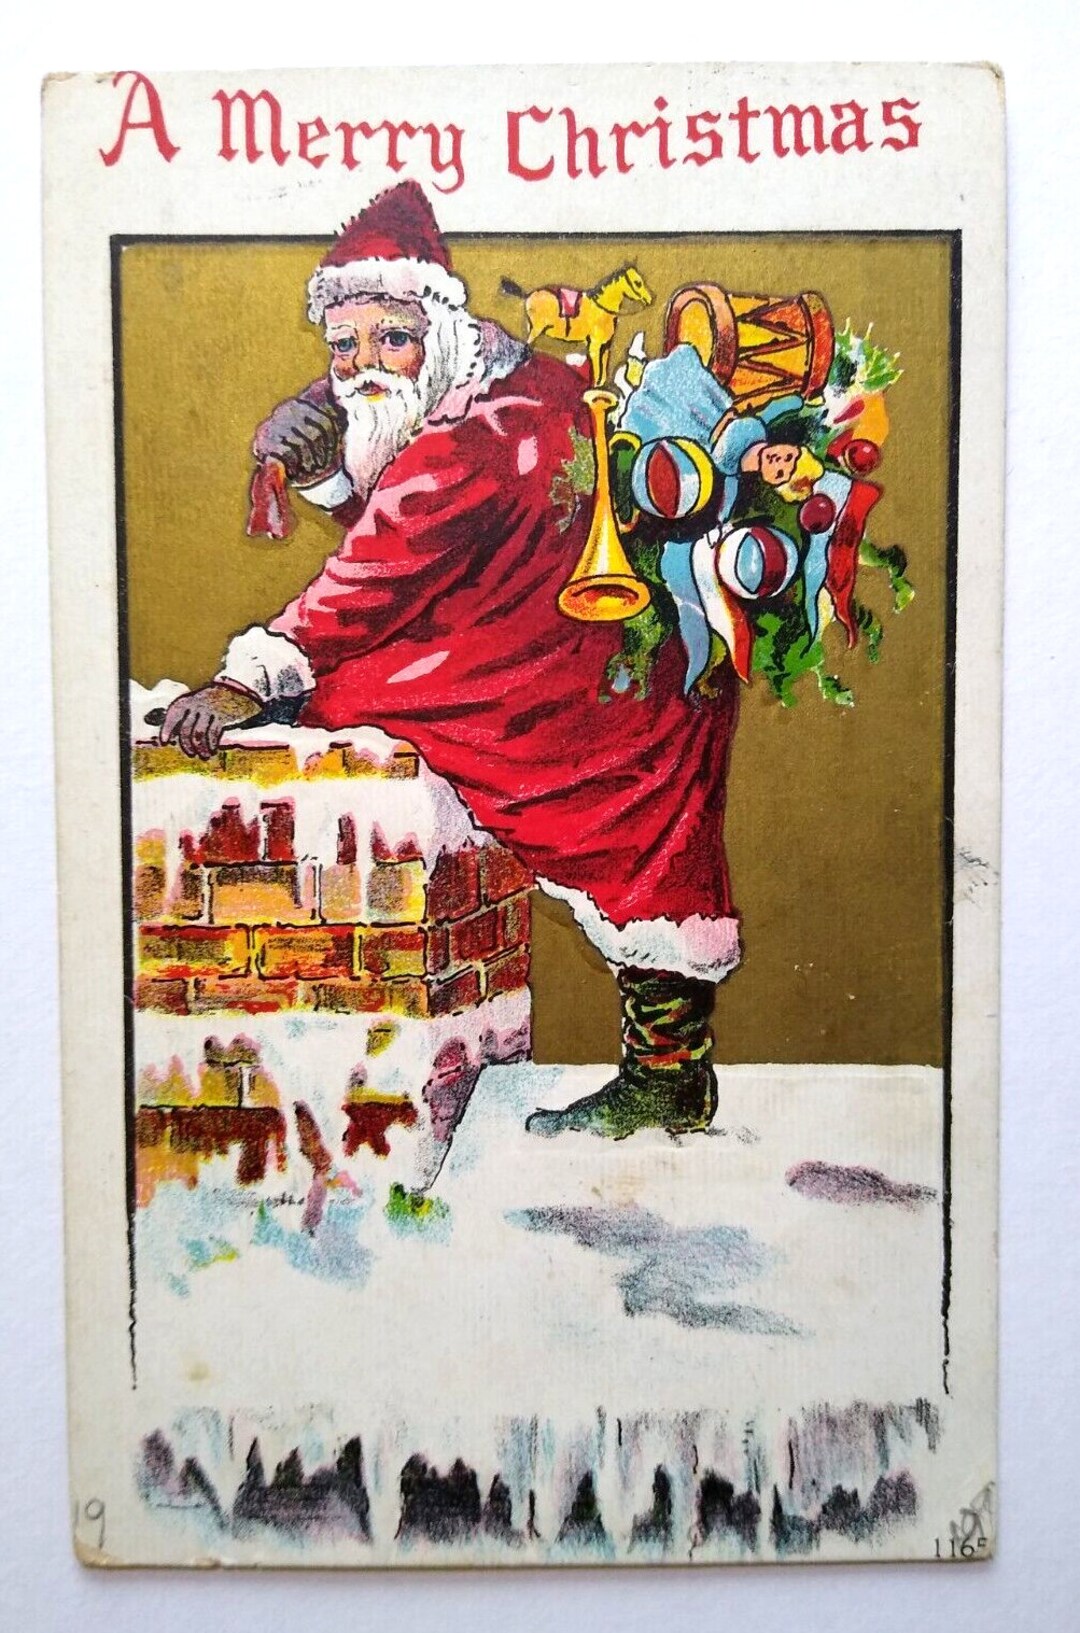 Christmas Postcard Santa Claus on Roof by Chimney Series 1165 - Etsy